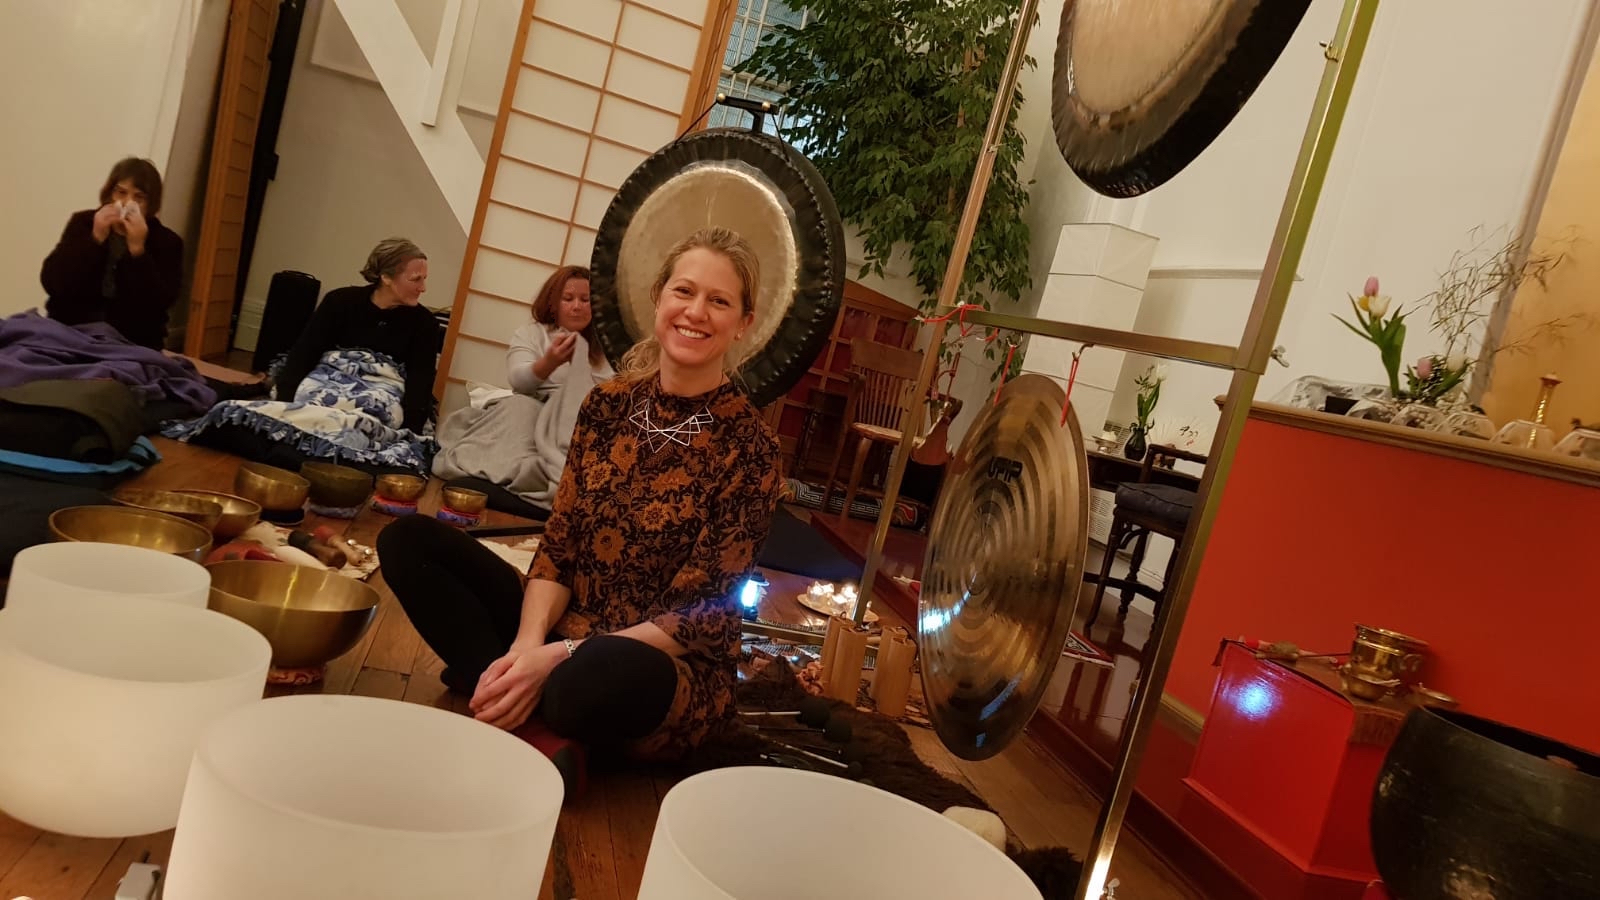 Start the Week with a restorative and uplifting Live Online Gong Bath